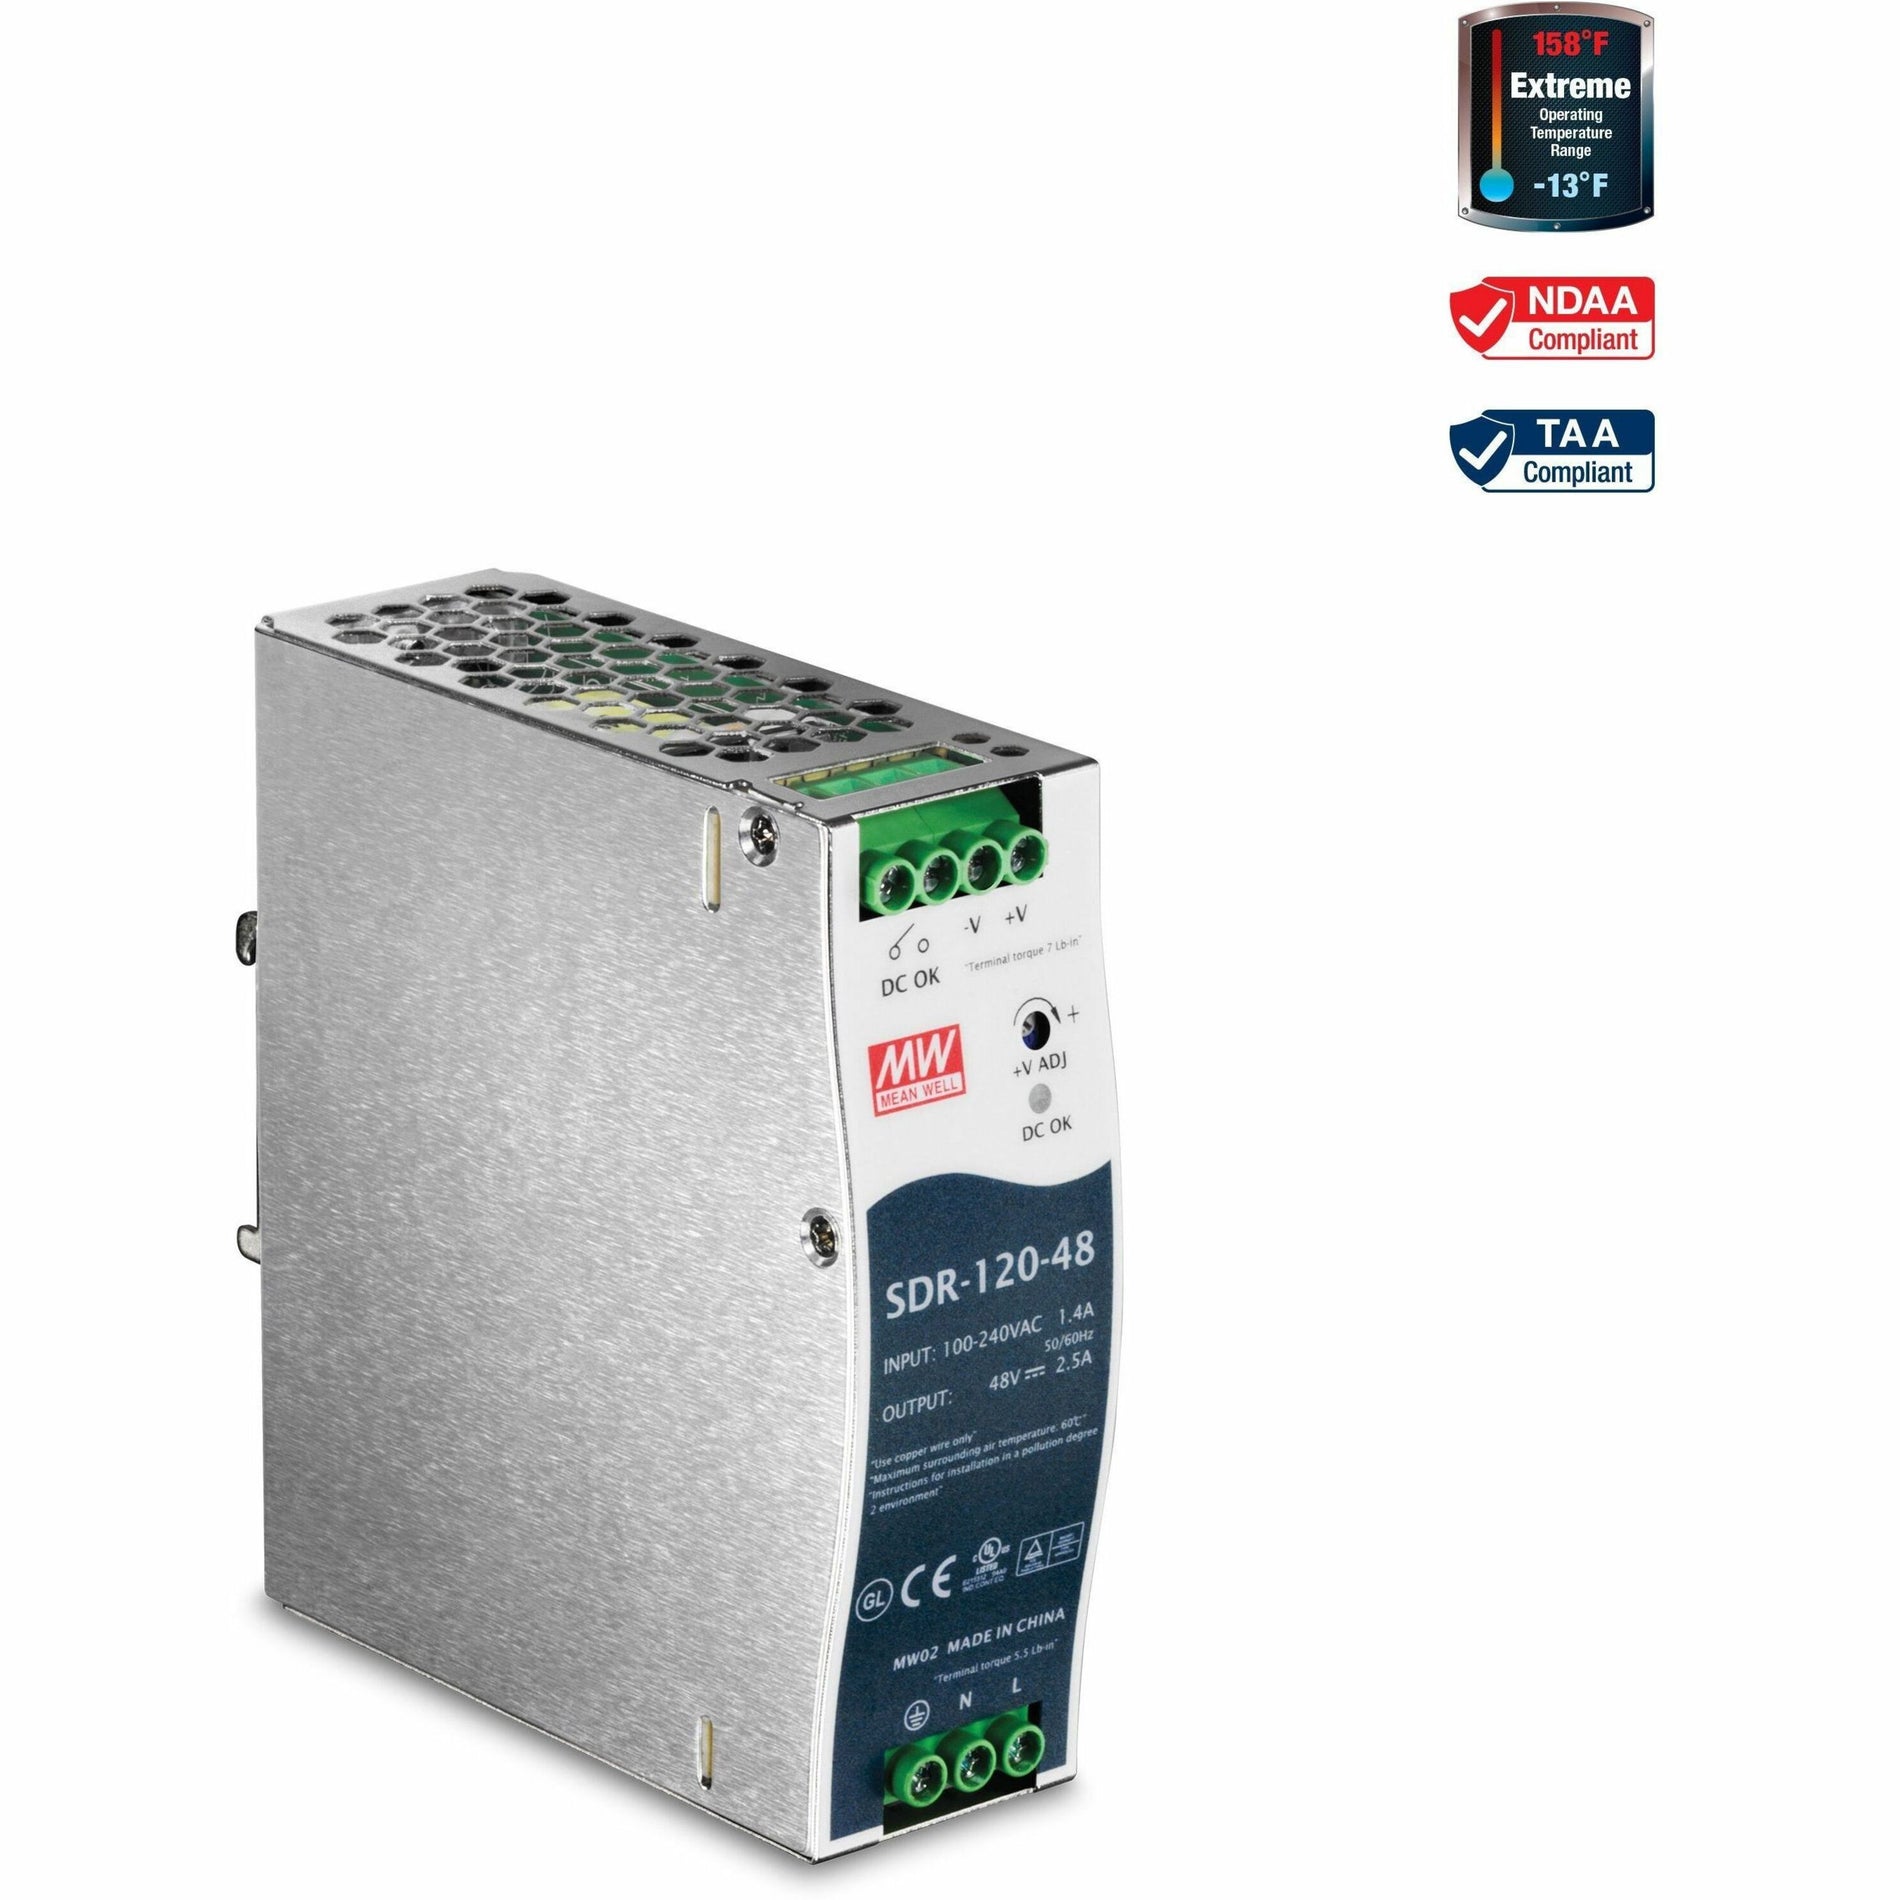 TRENDnet TI-S12048 DIN Rail 48V 120W Power Supply for TI-PG541, Extreme -25 to 70 °C Operating Temp, Overload Protection, Silver